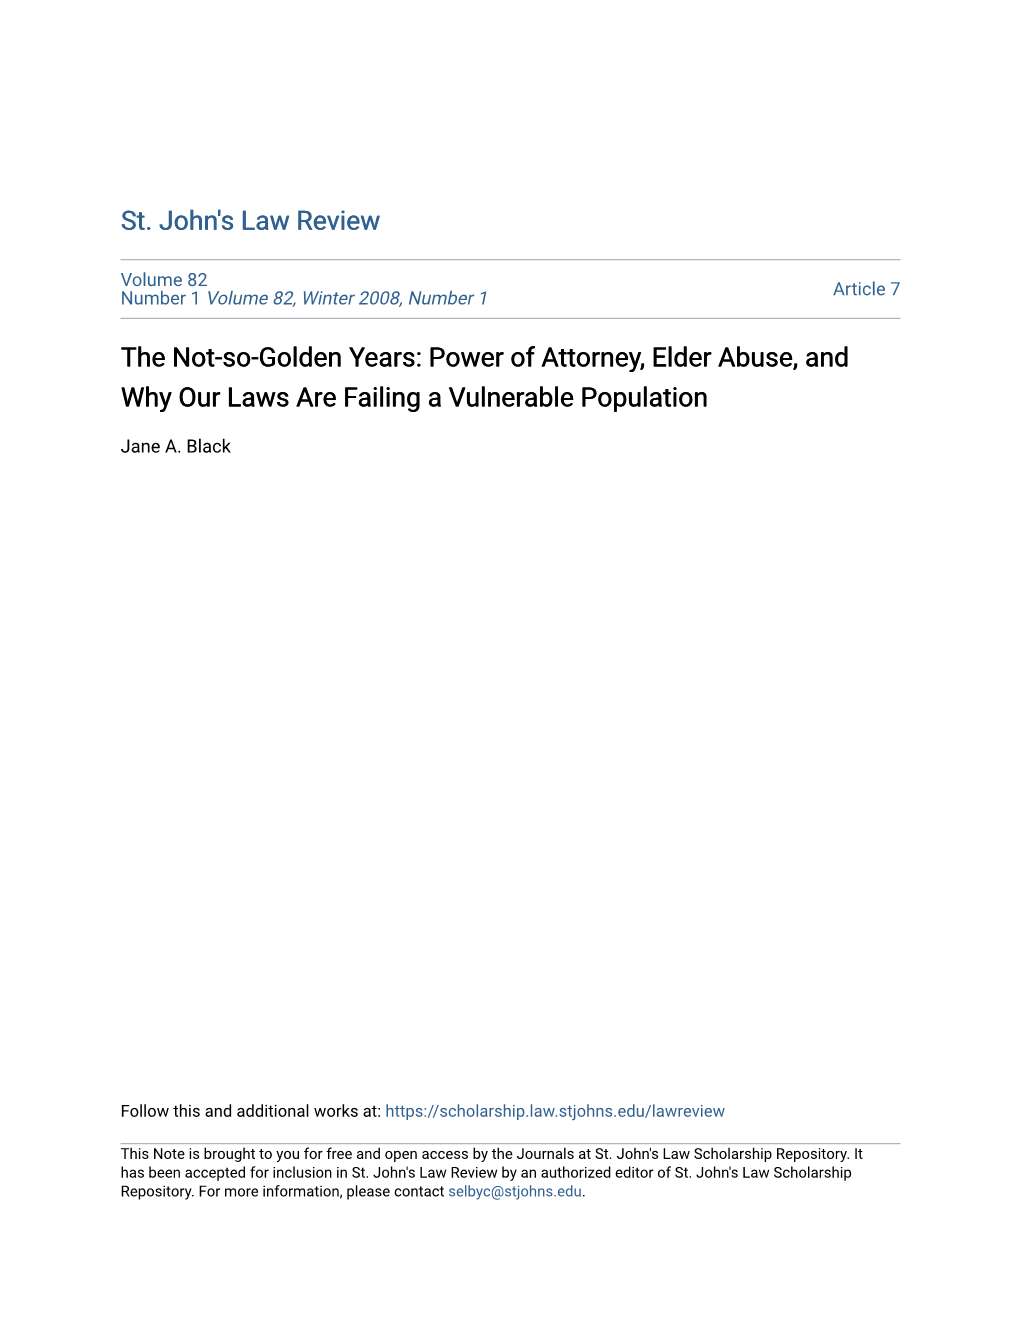 The Not-So-Golden Years: Power of Attorney, Elder Abuse, and Why Our Laws Are Failing a Vulnerable Population